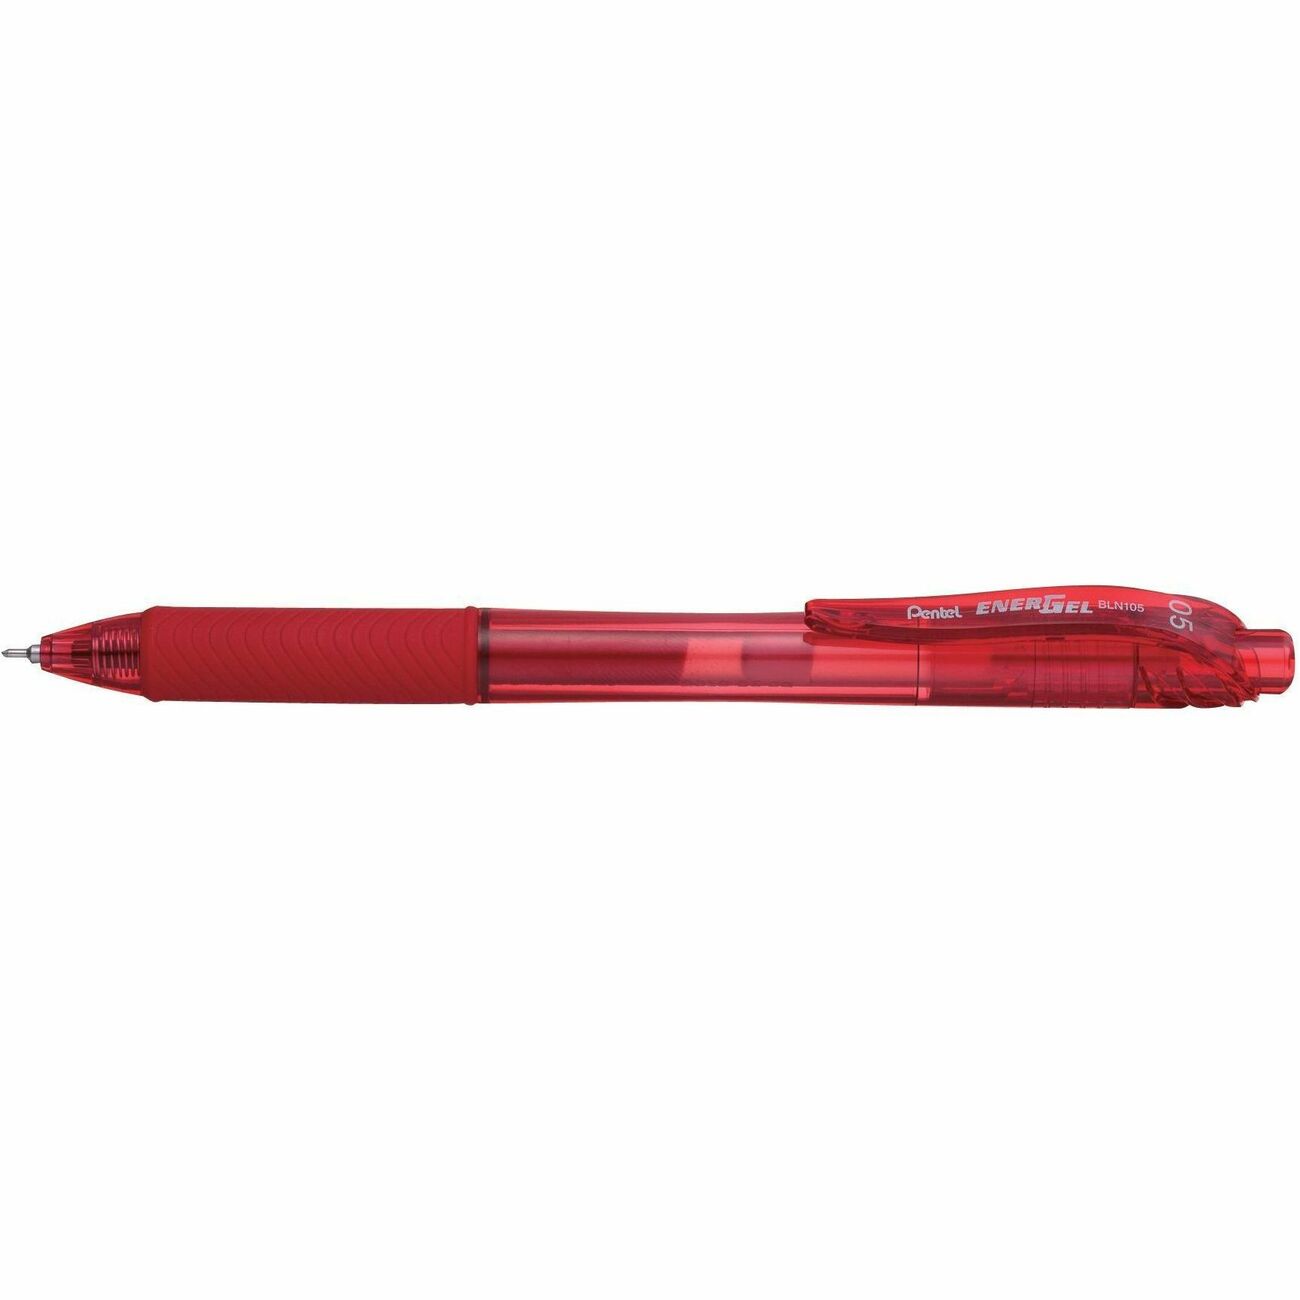 West Coast Office Supplies :: Office Supplies :: Writing & Correction ...